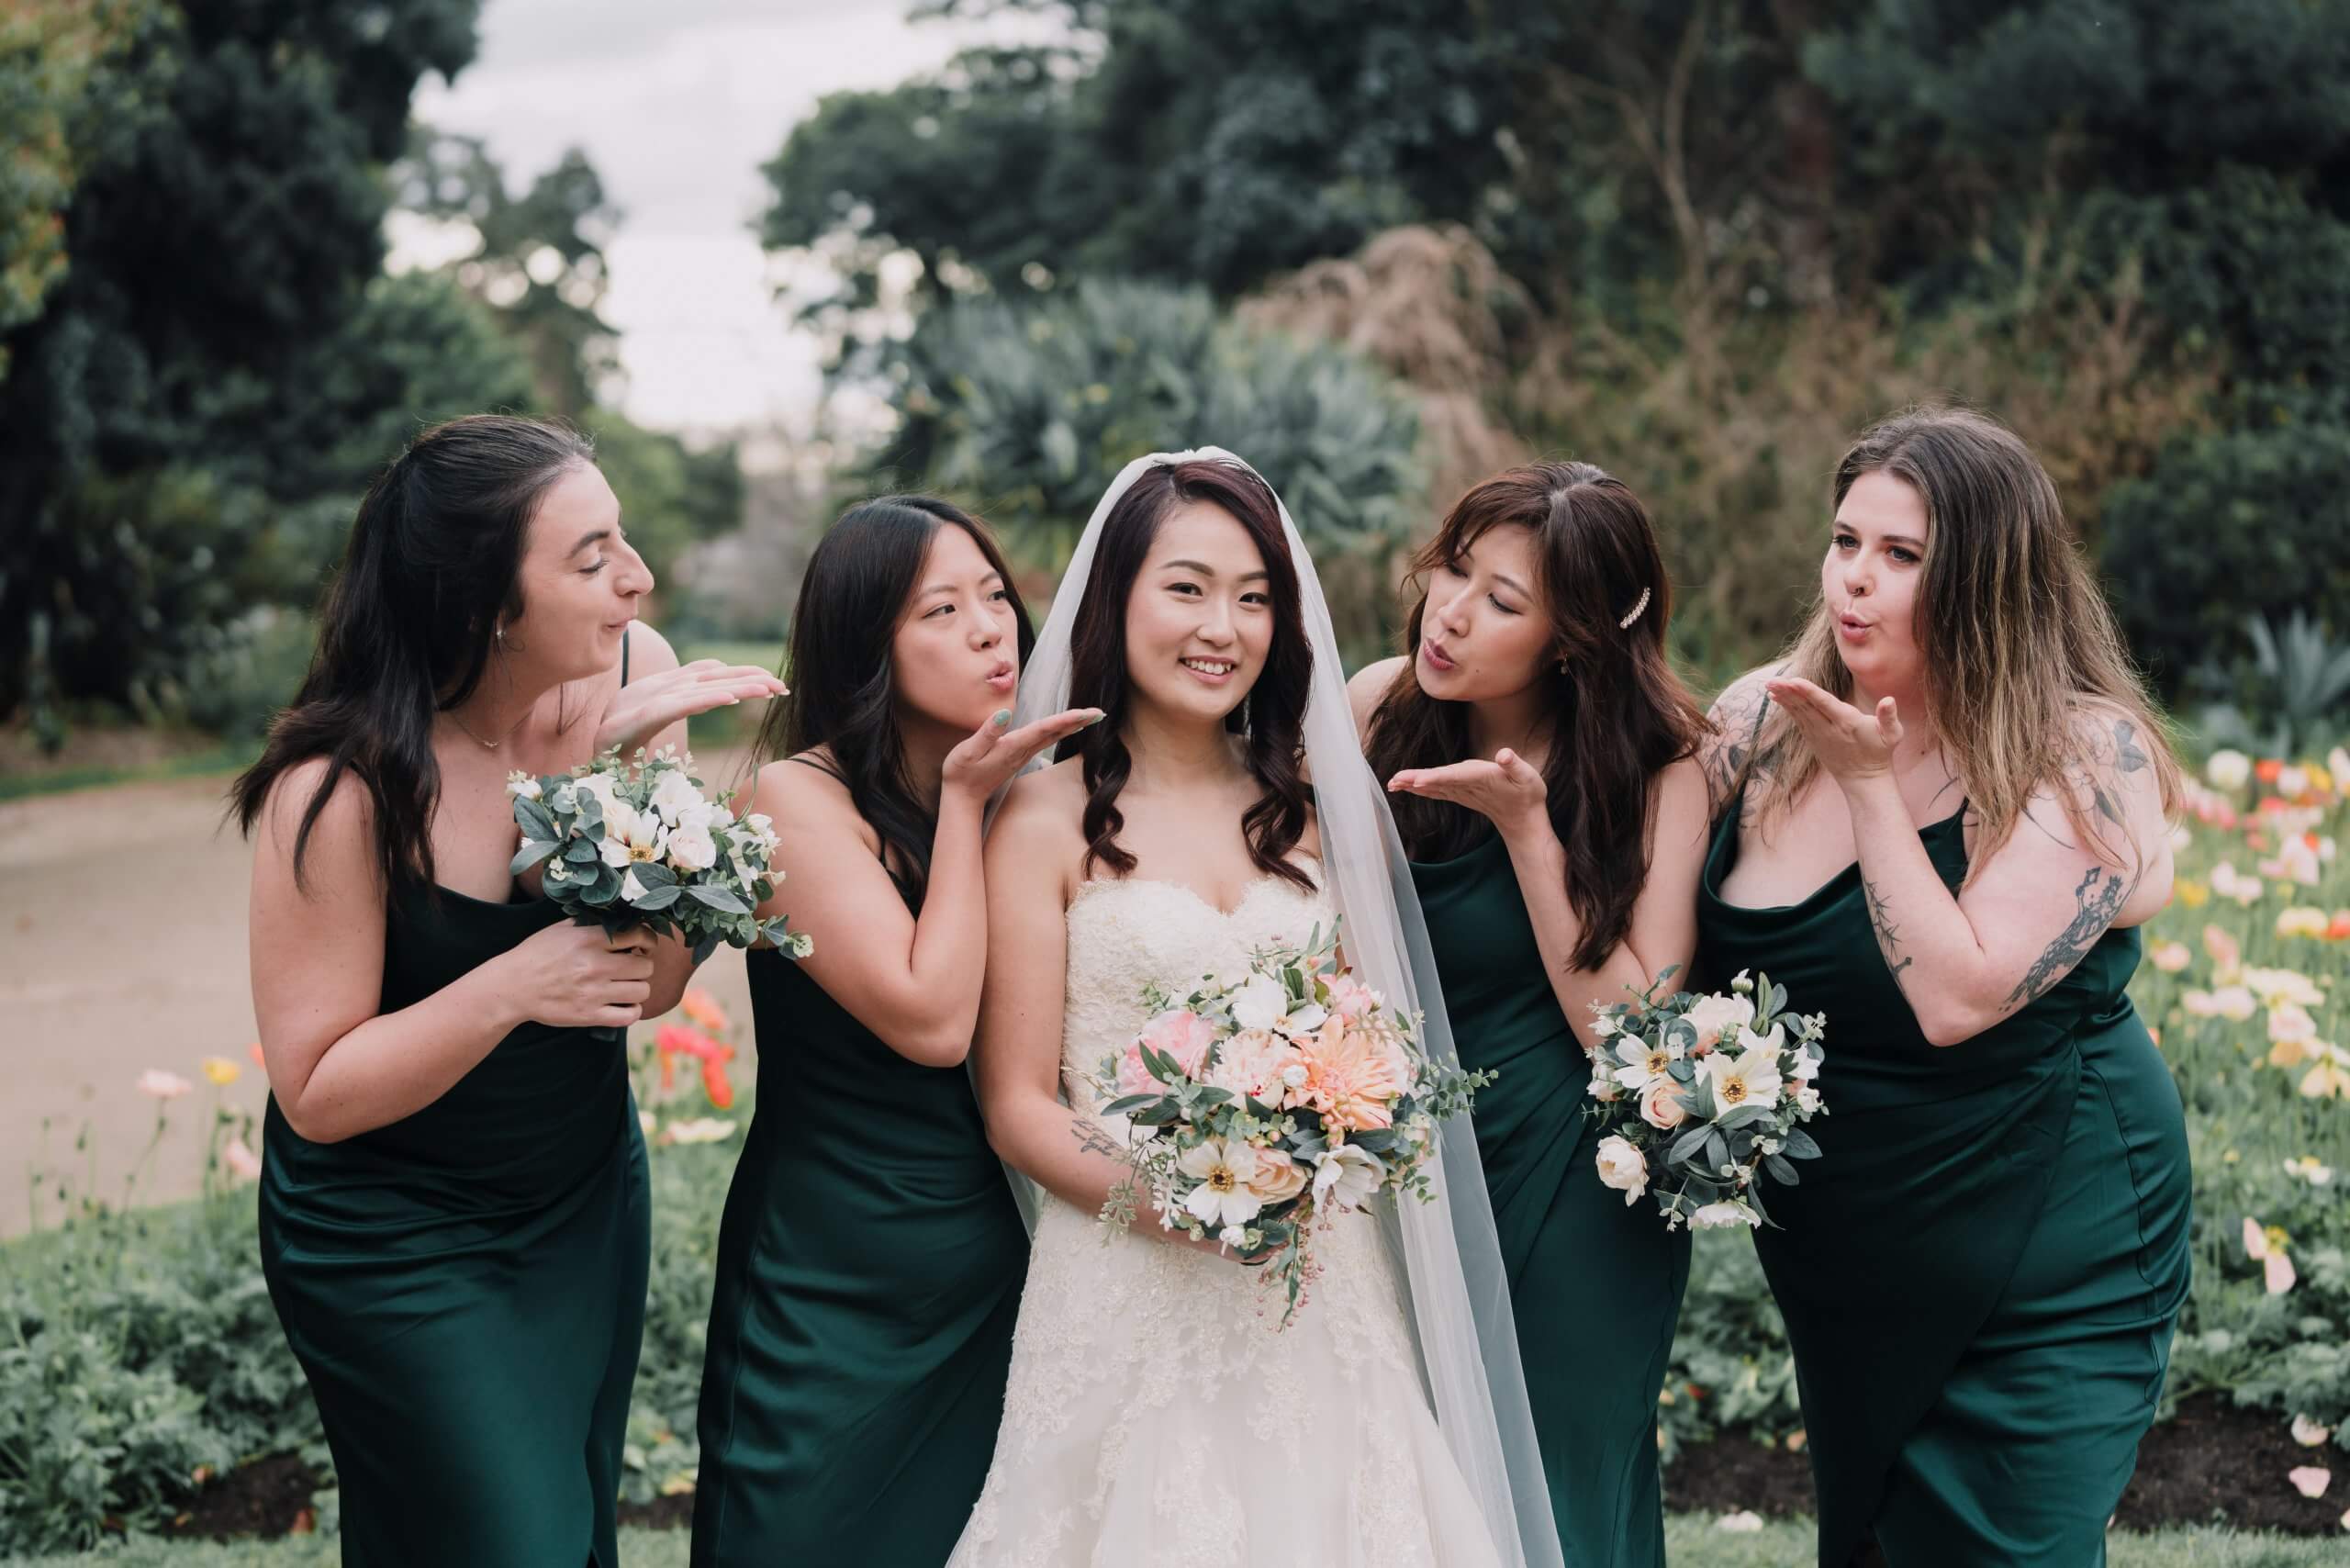 Four bridesmaids, dressed in metallic emerald green dresses, blows kisses on the smiling bride.